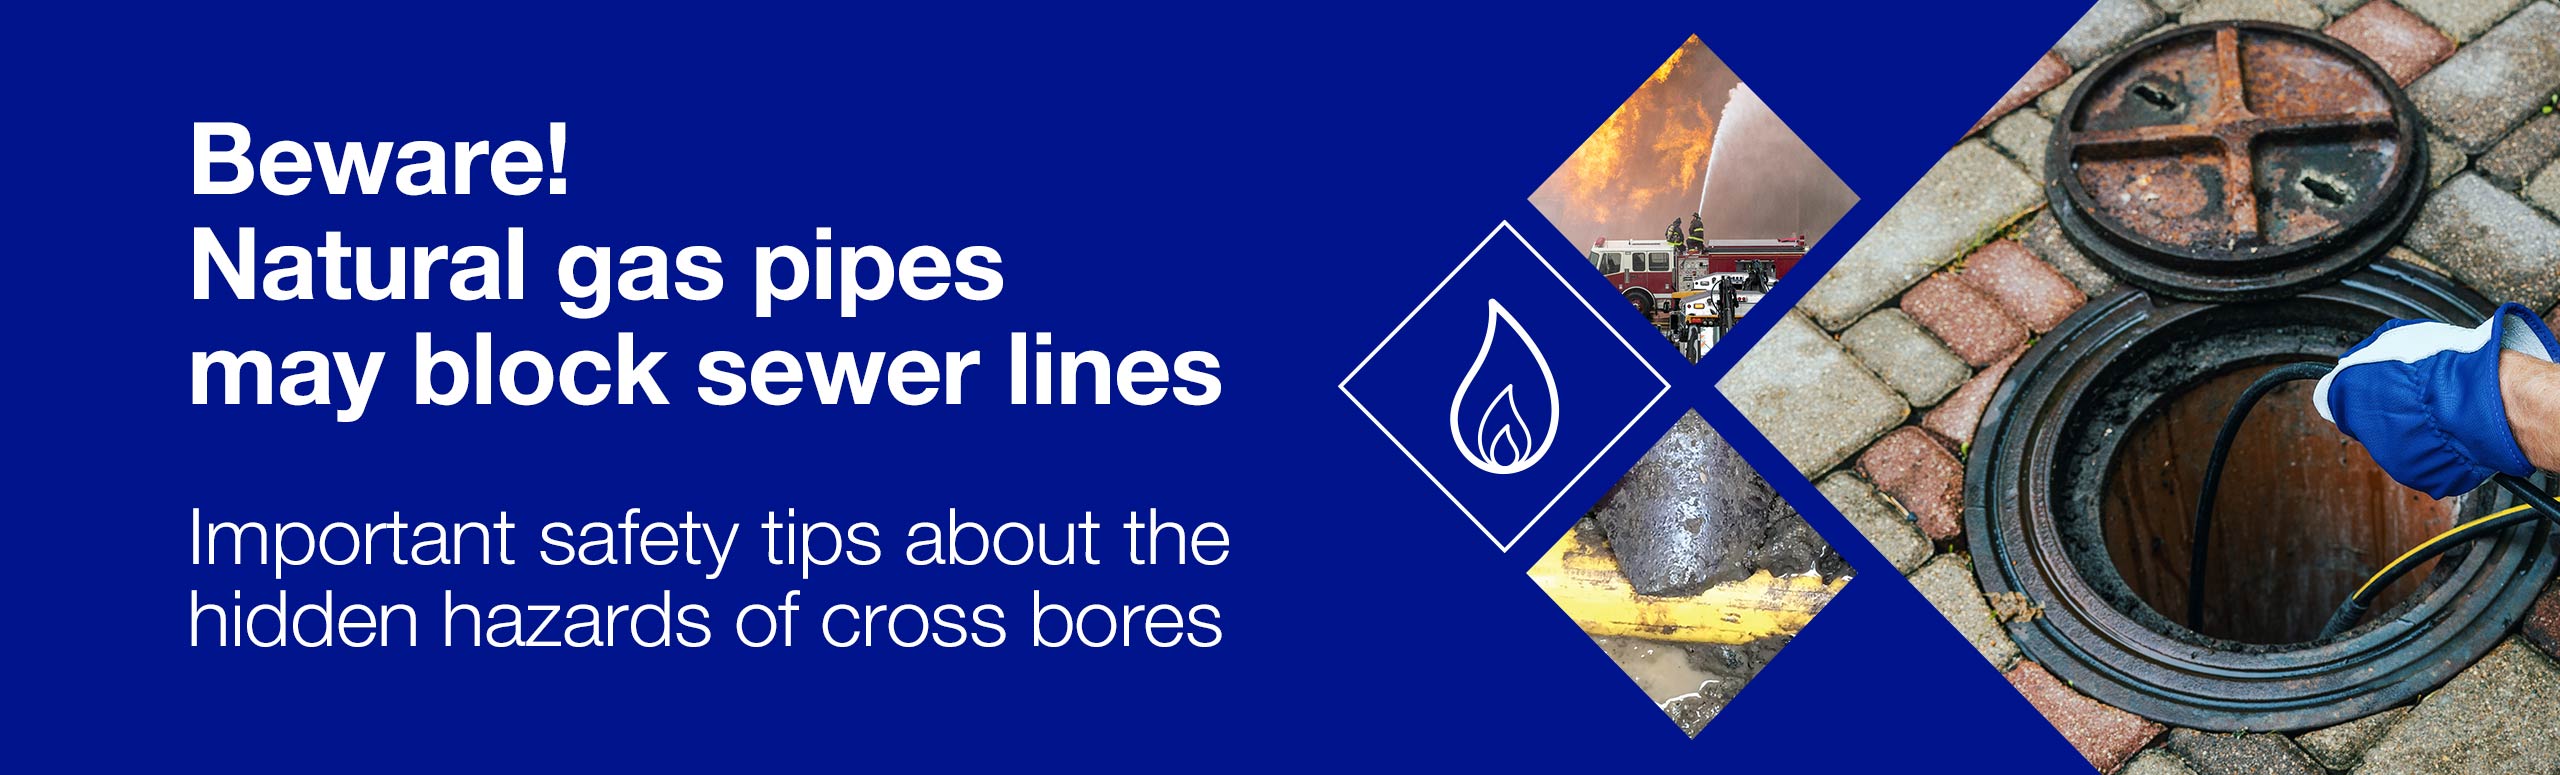 Beware! Natural gas pipes may intersect sewer lines